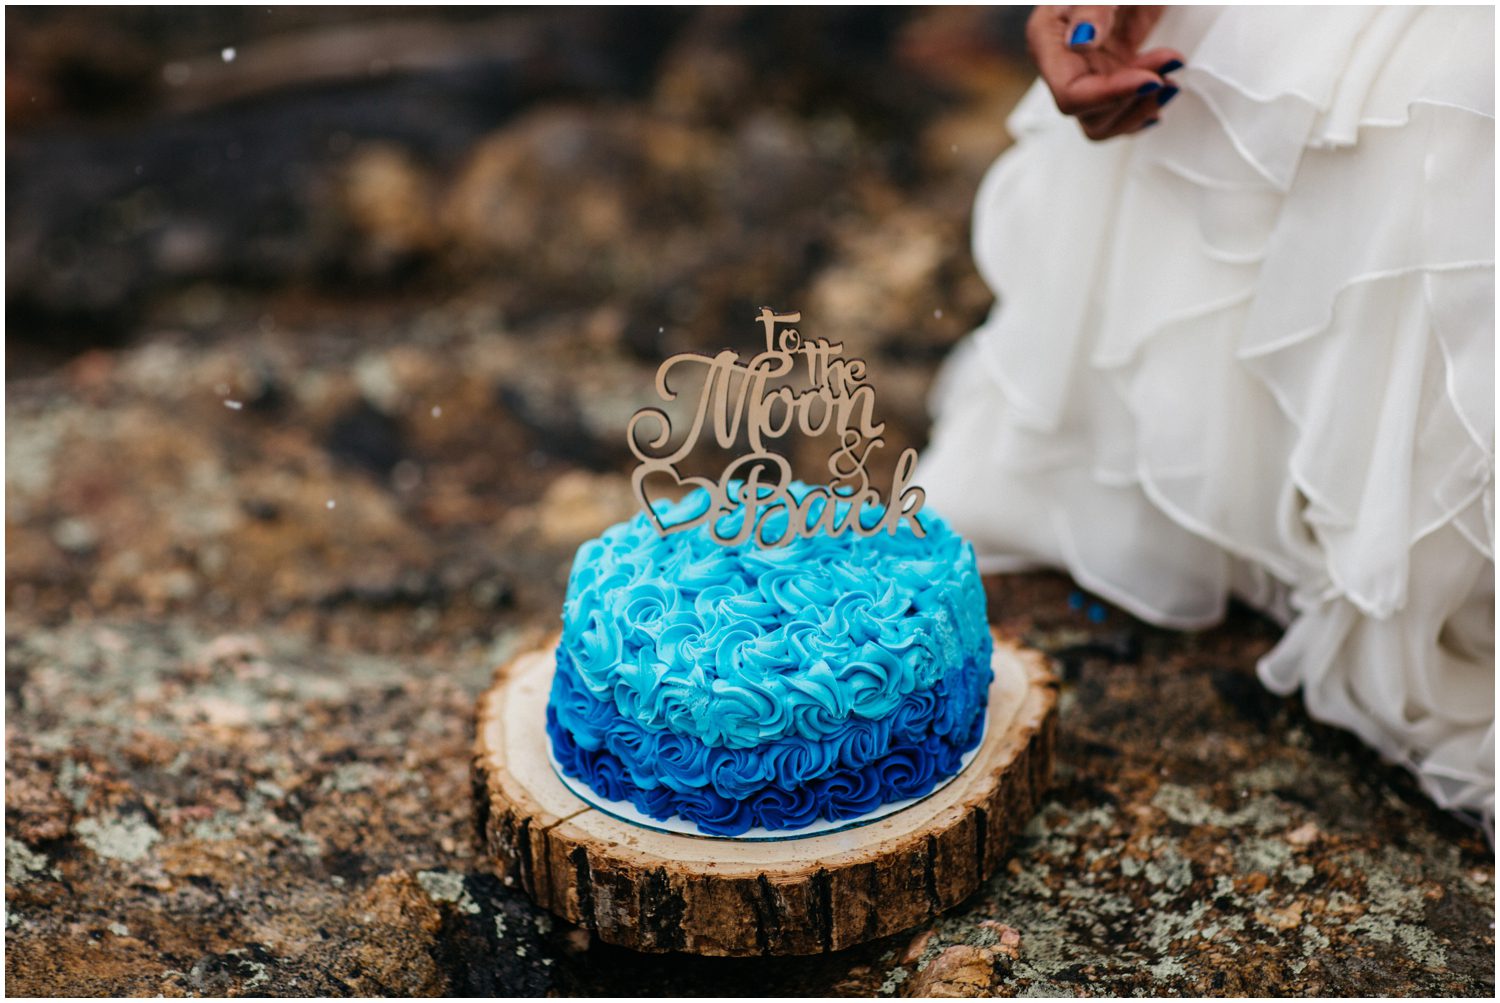 Laser cut cake topper, to the moon and back cake topper, to the moon and back wedding, Colorado Elopement Photographer, Rocky Mountain National Park Elopement, Estes Park Elopement, 3M Curve Elopement, Colorado Elopement Photos, Elope in Colorado, Adventure Wedding in Colorado, Adventurous Wedding Photographer, Colorado Winter Wedding, Colorado Wedding Locations, Colorado Elopement Locations, Adventure Elopement, Elopement Photographer, Destination Elopement, Mountain Elopement, Elopement Ideas